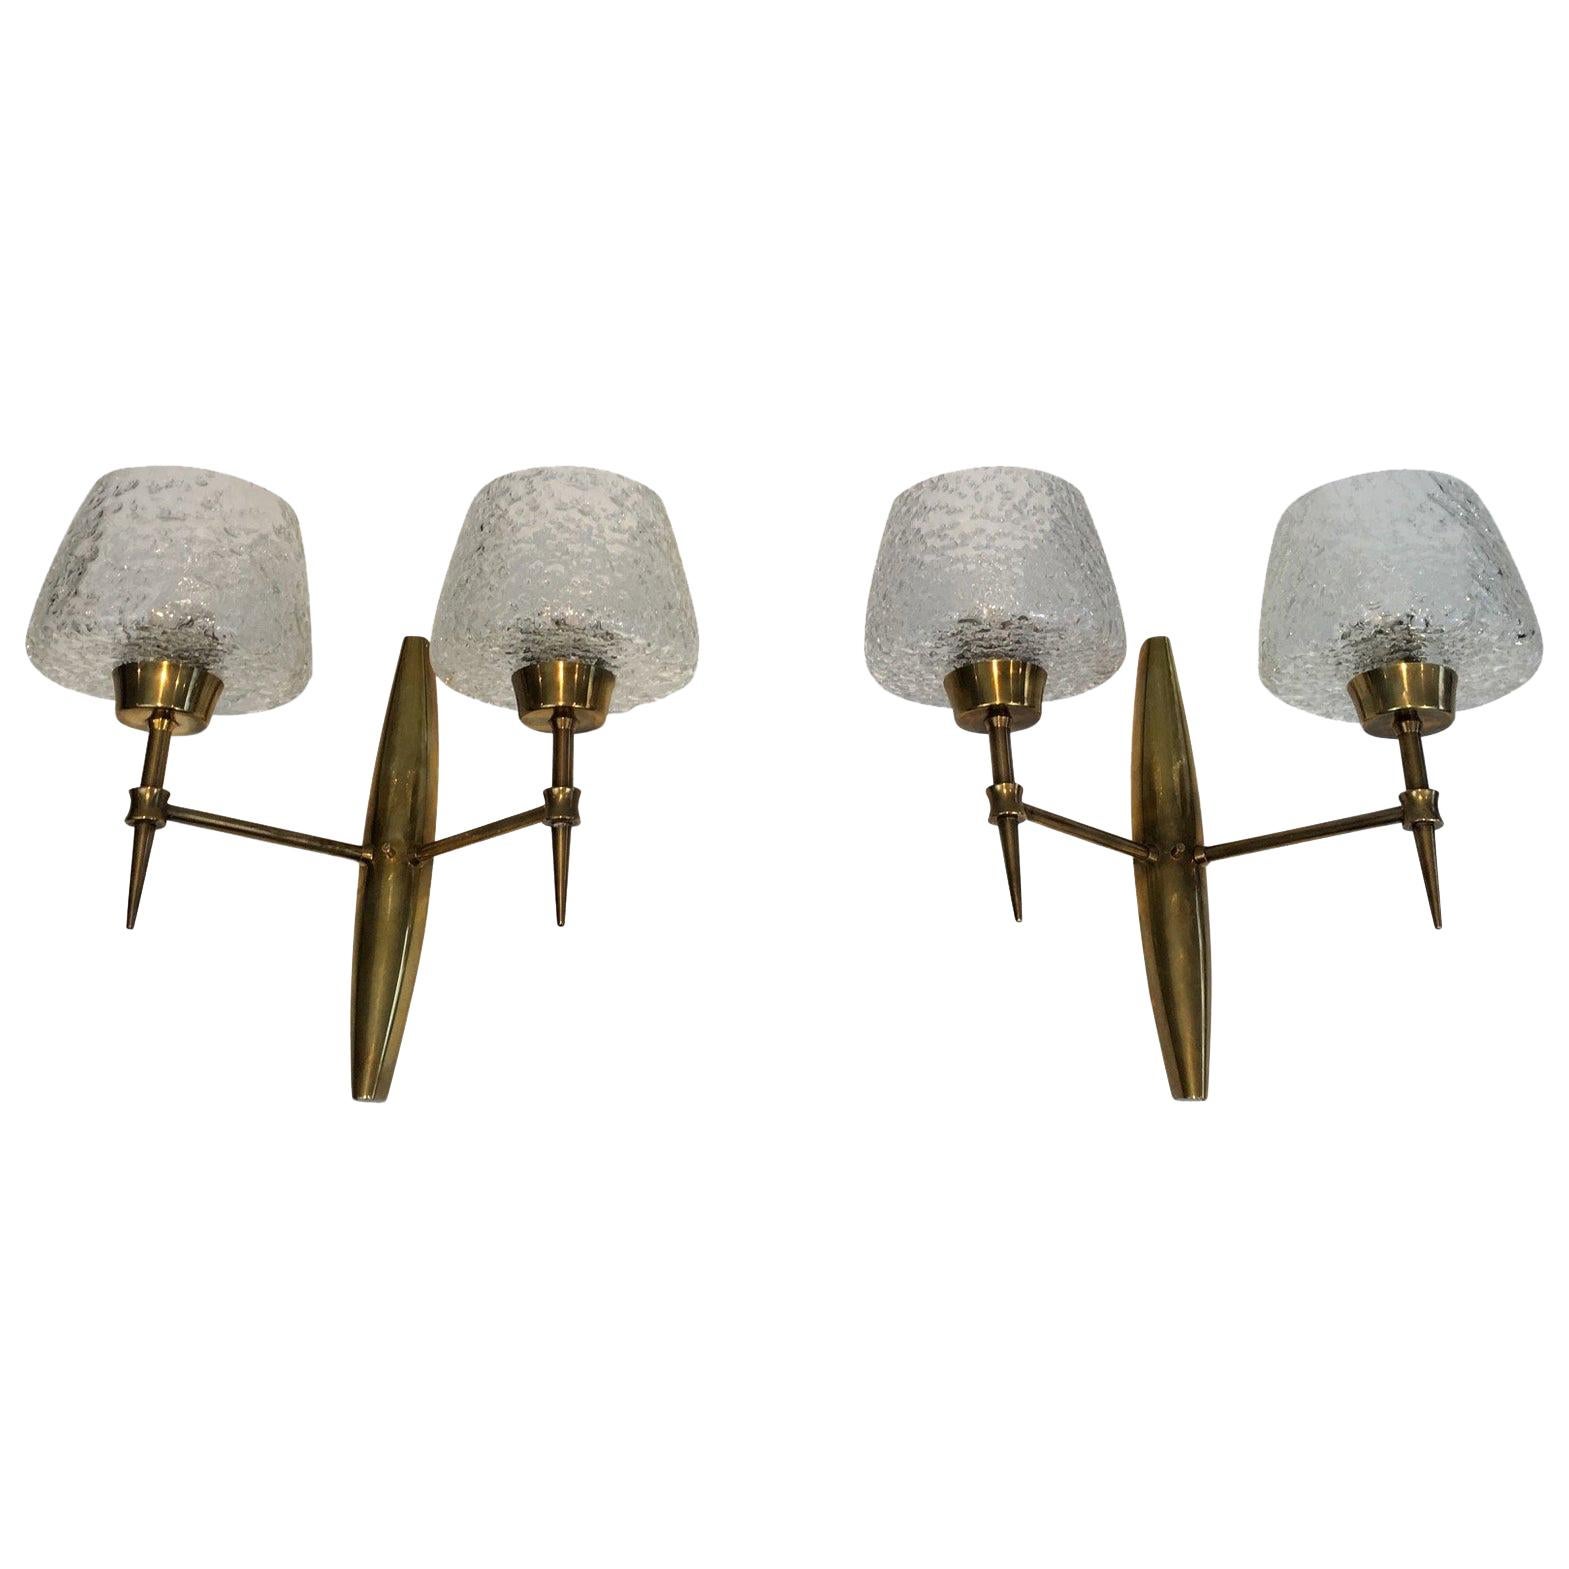 Pair of Bronze wall Sconces with Worked Glass Reflectors, Italian, circa 1960